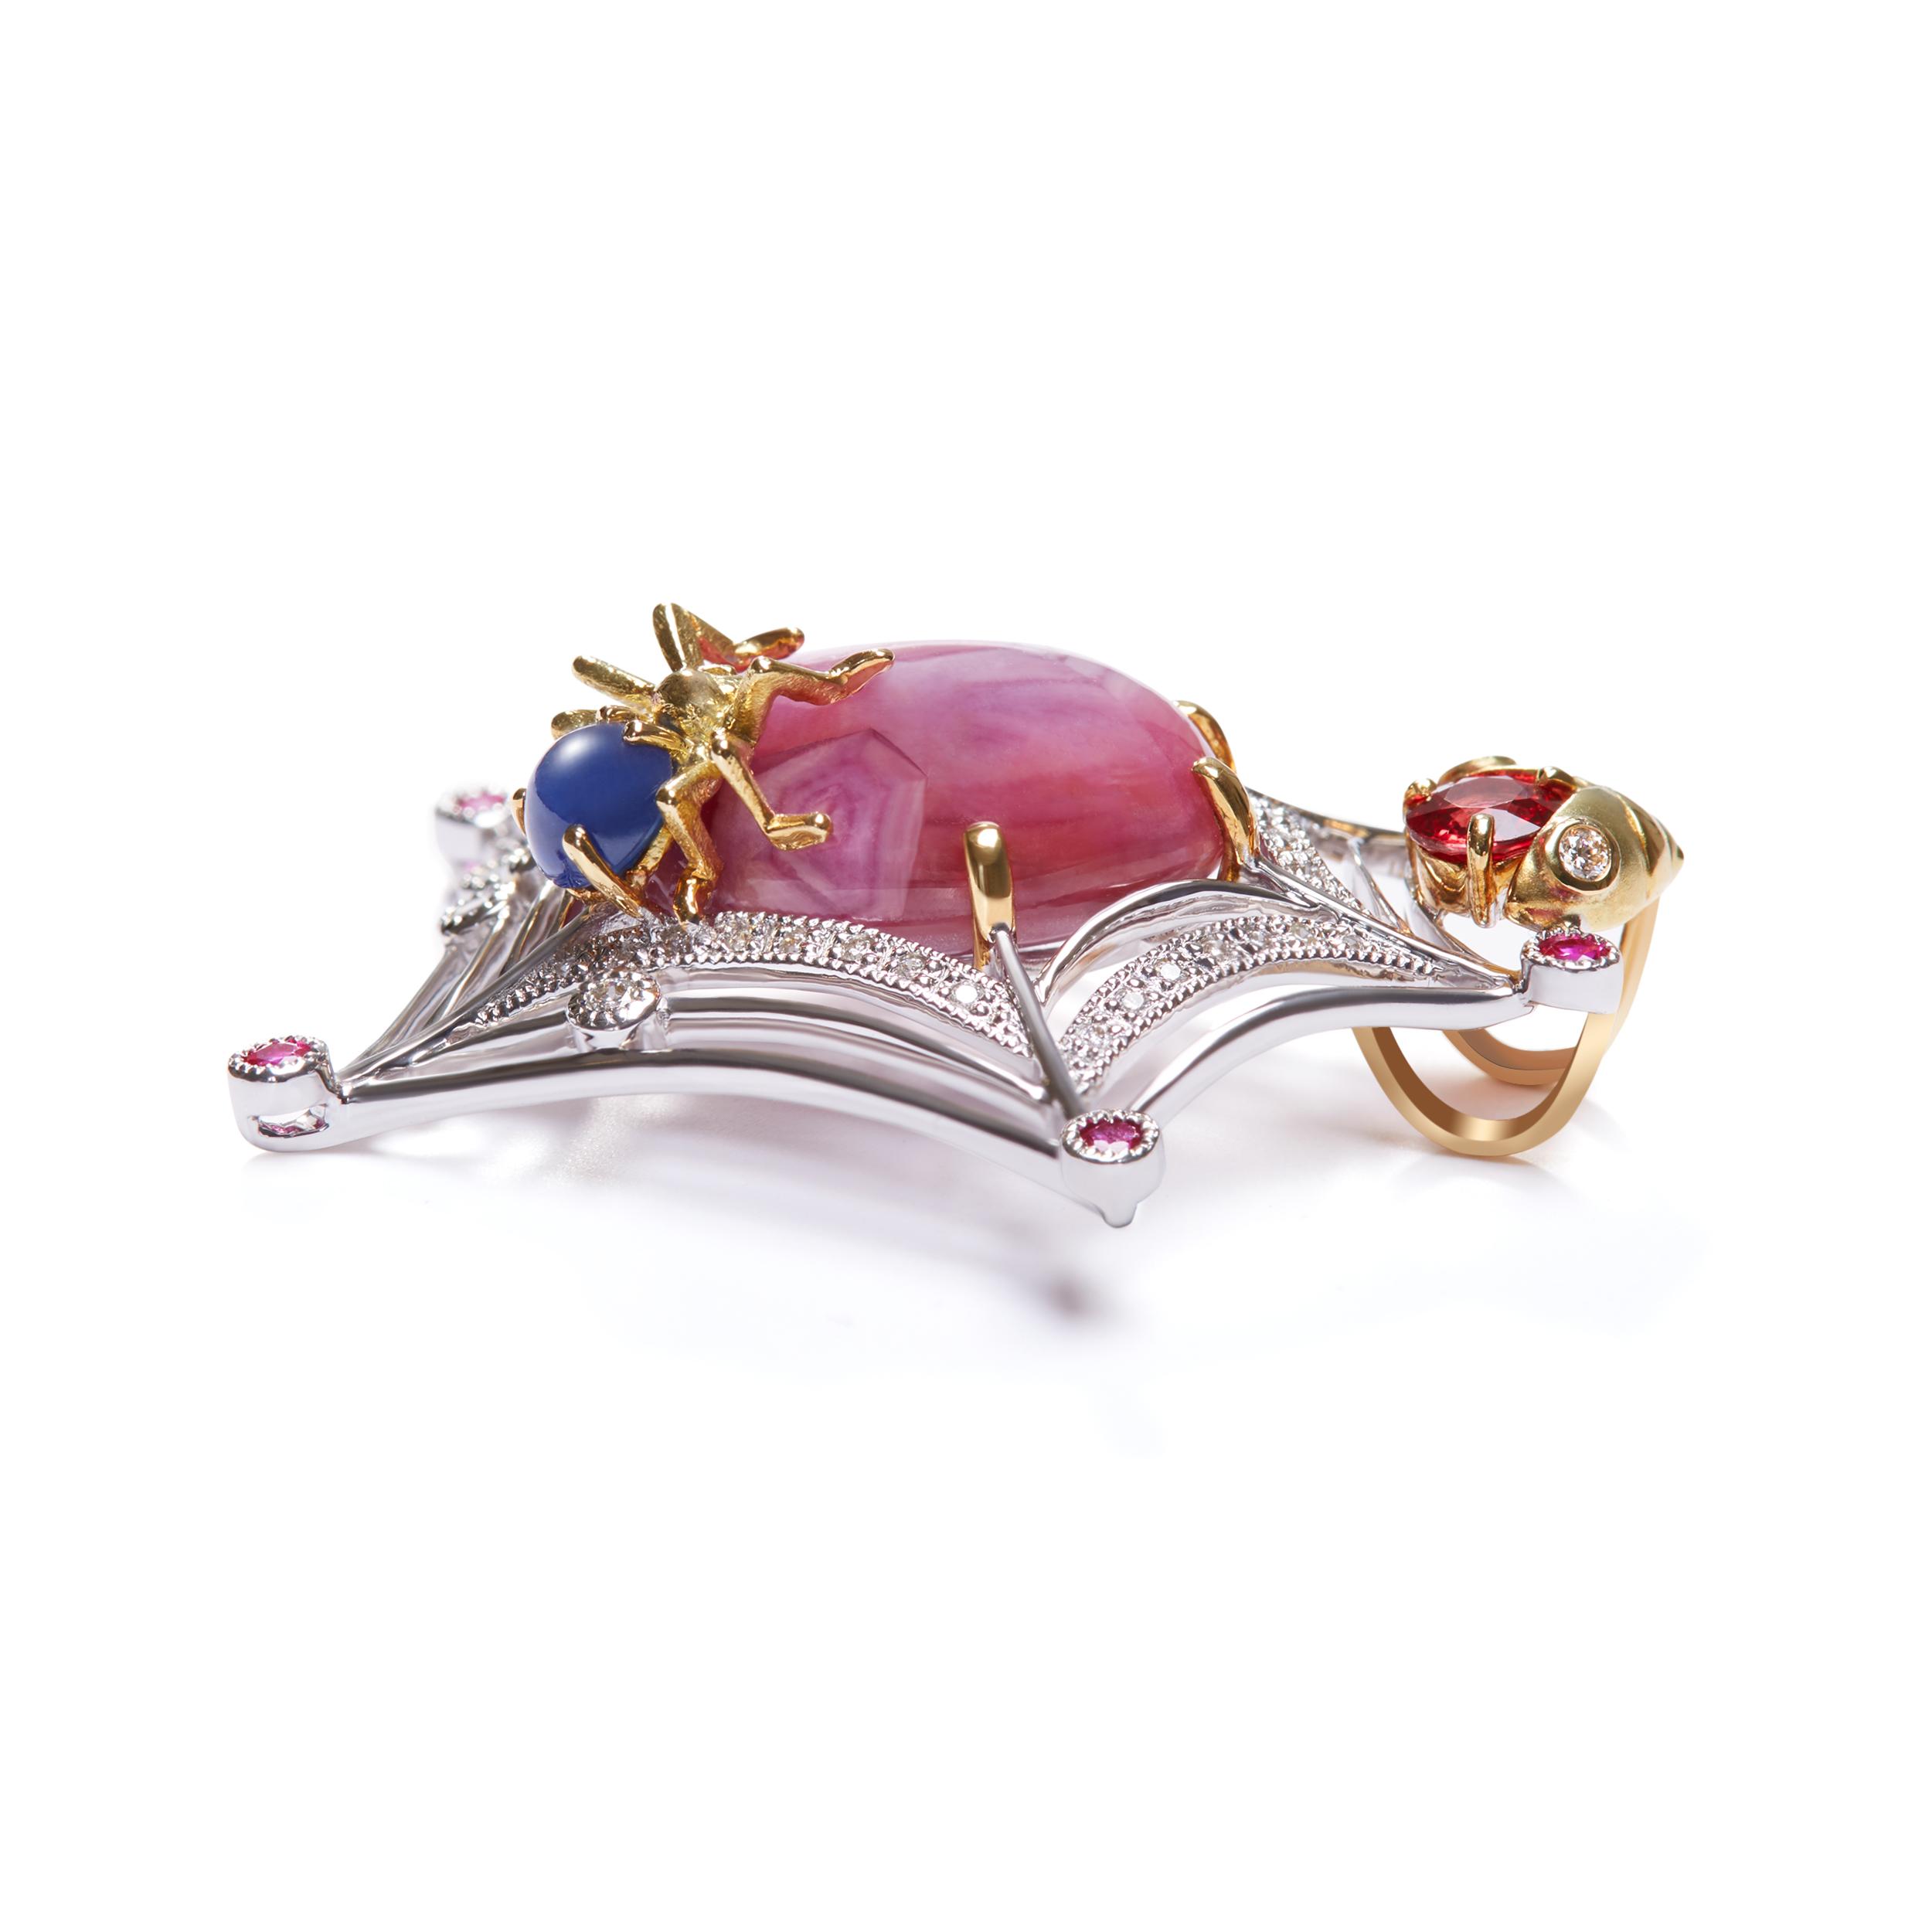 Gemstone Brooch decorated with Spider-shaped 2